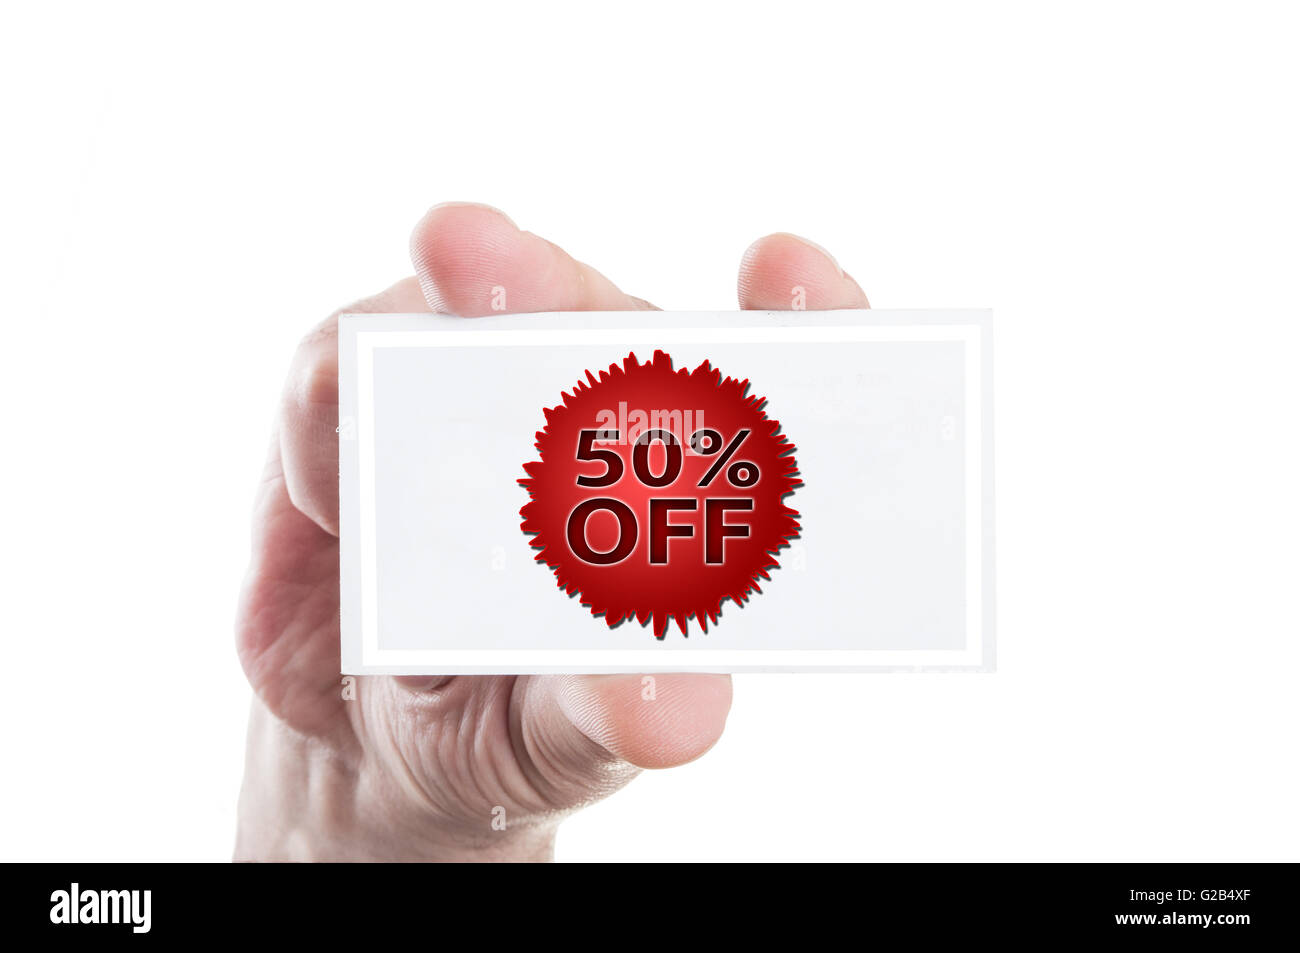 Fifty or 50 percent off coupon card concept illustration Stock Photo